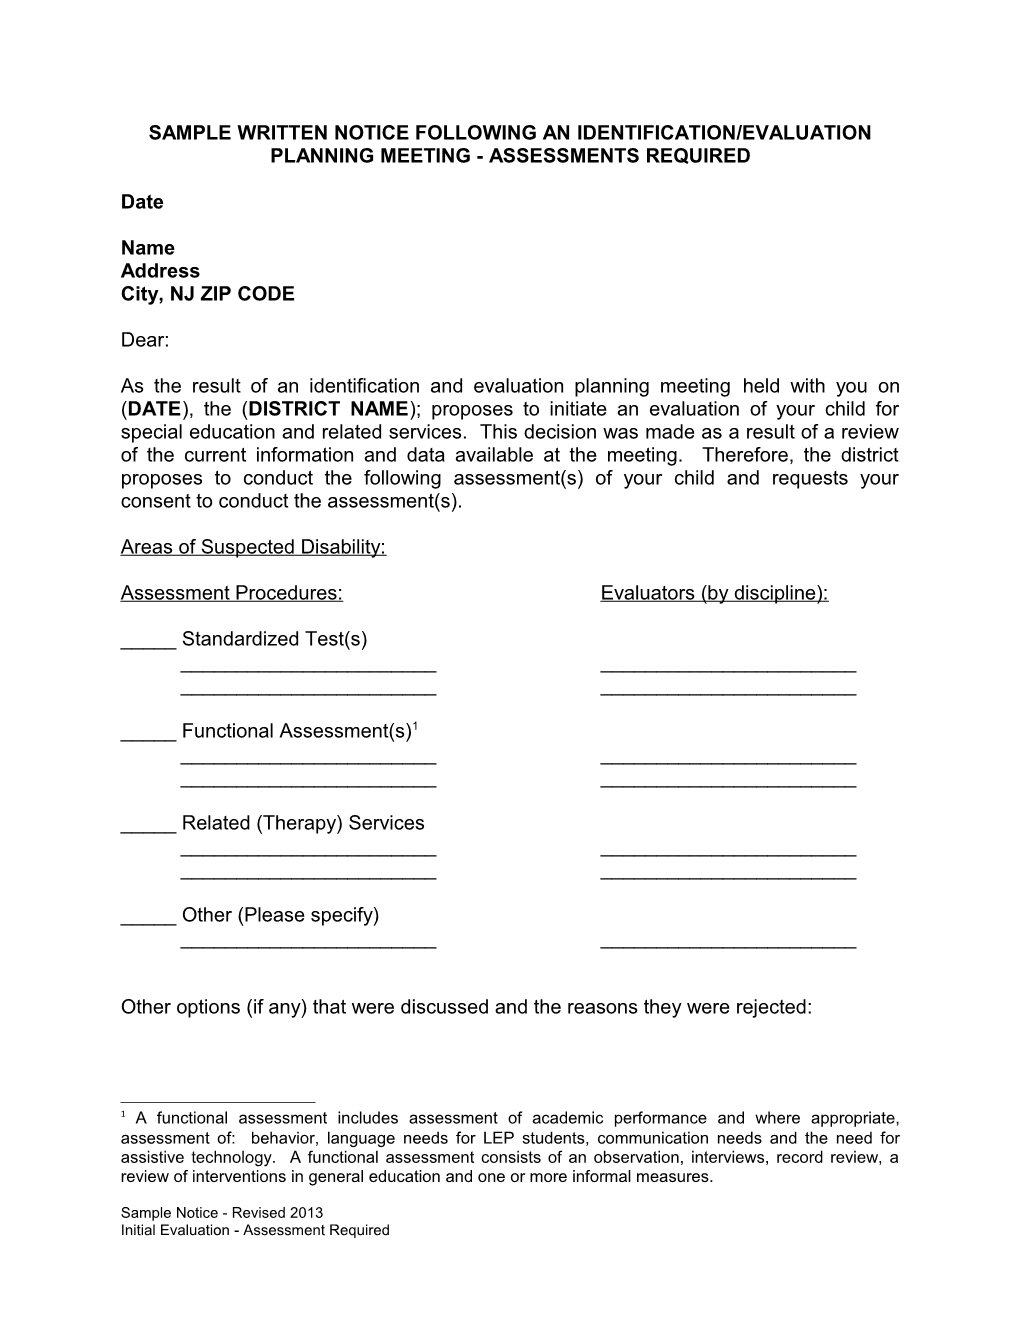 Sample Written Notice Following an Identification/Evaluation Planning Meeting - Assessments